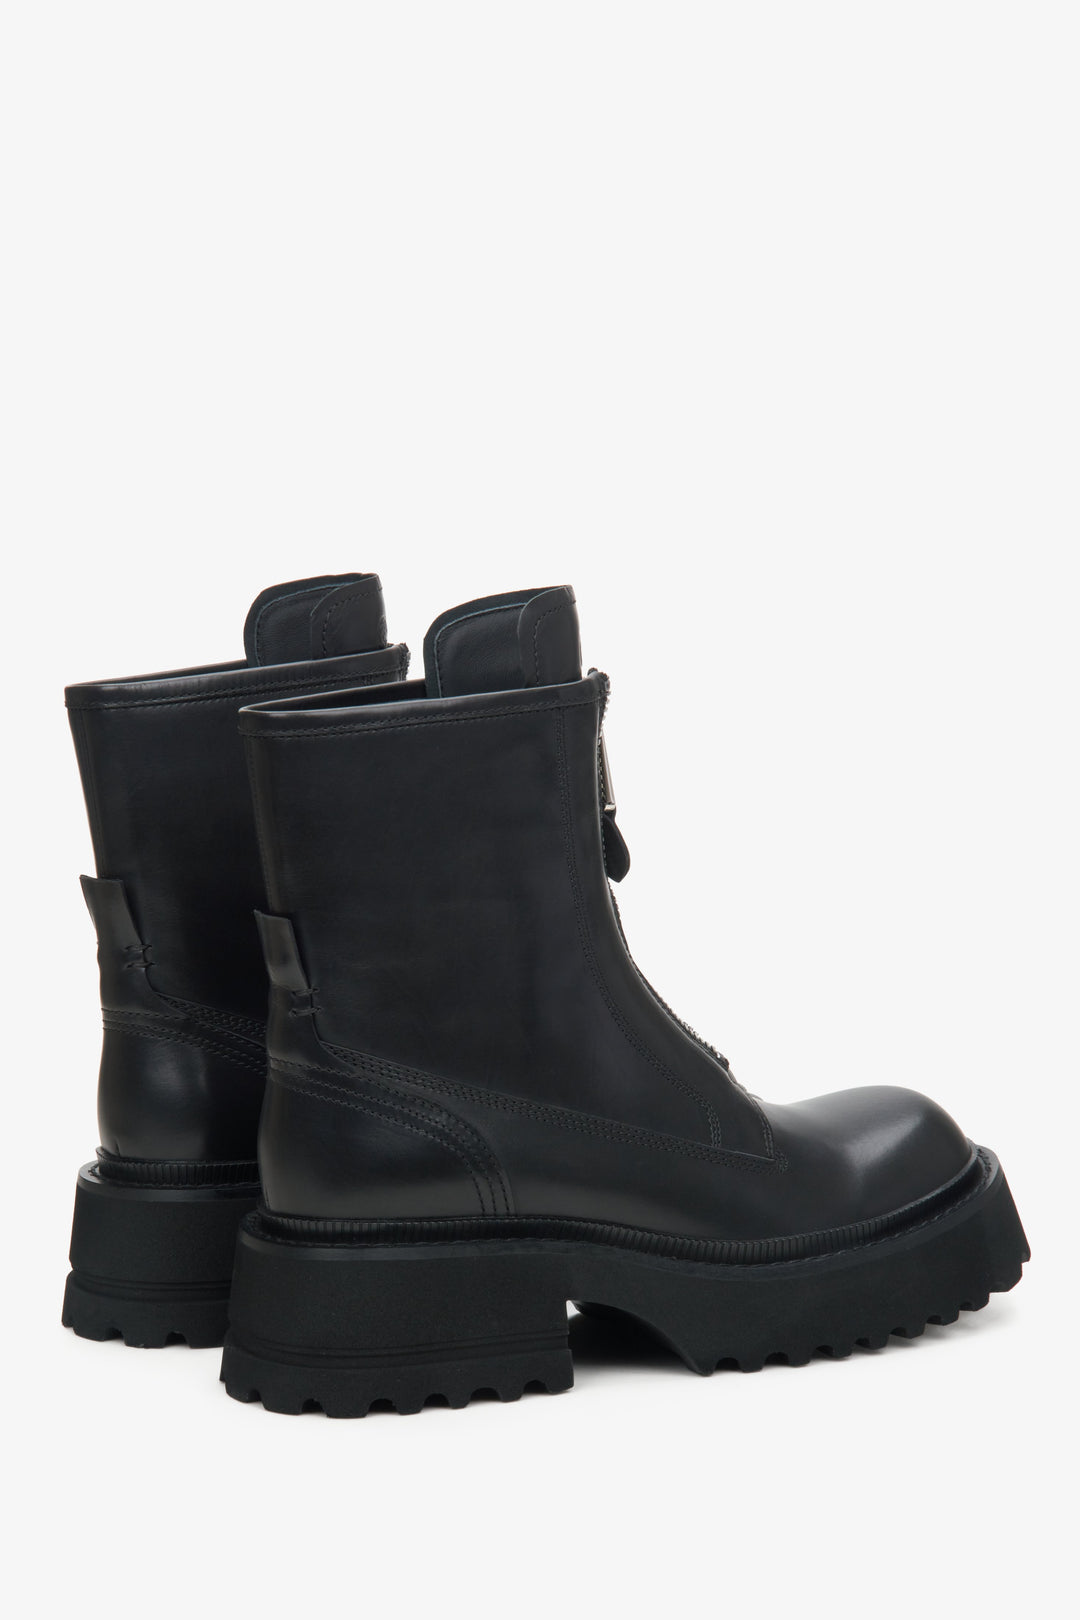 Women's black boots made of genuine leather with a decorative zipper - close-up on the side line and heel counters.